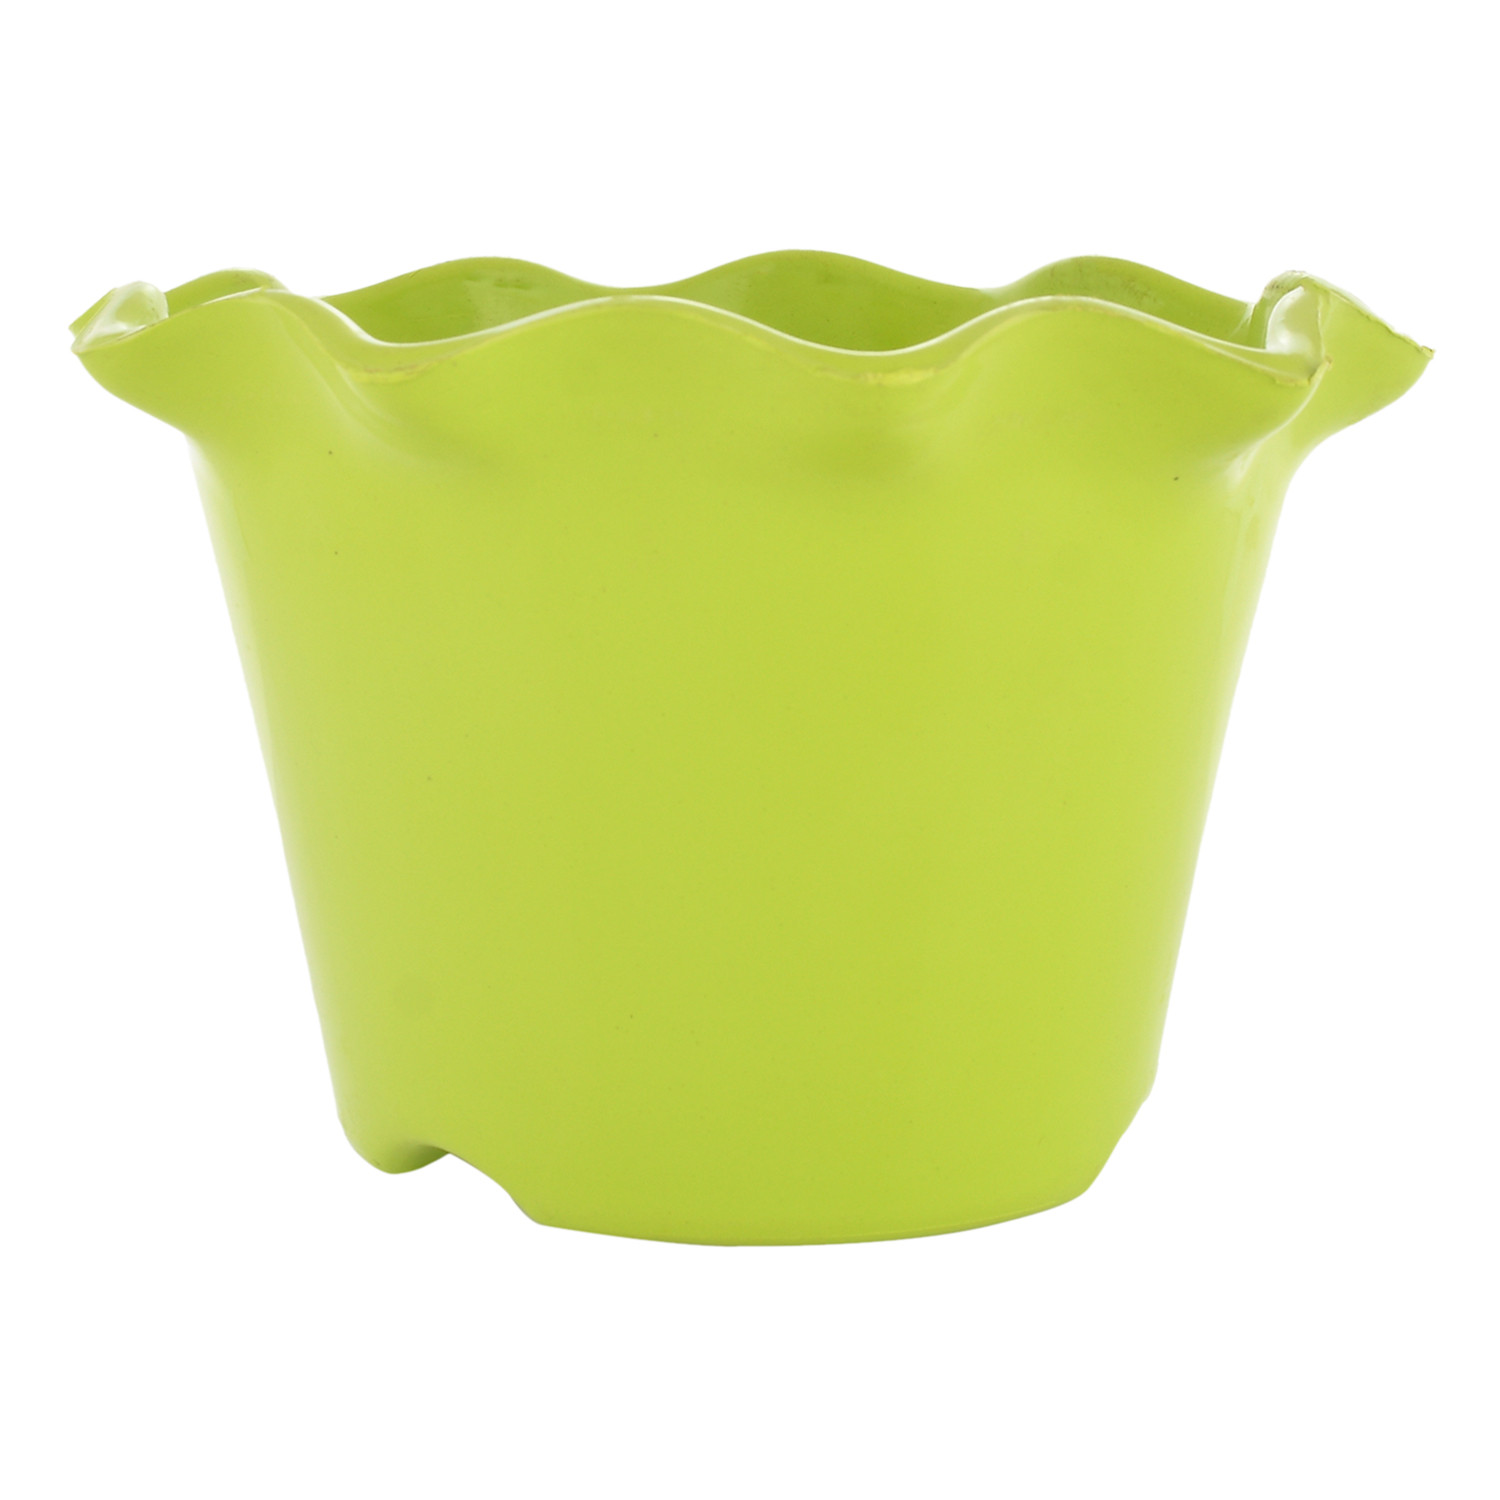 Kuber Industries Blossom Flower Pot|Durable Plastic Flower Pot|Gamla With Drain Holes for Home Décor|Balcony|Garden|8 Inch (Green)